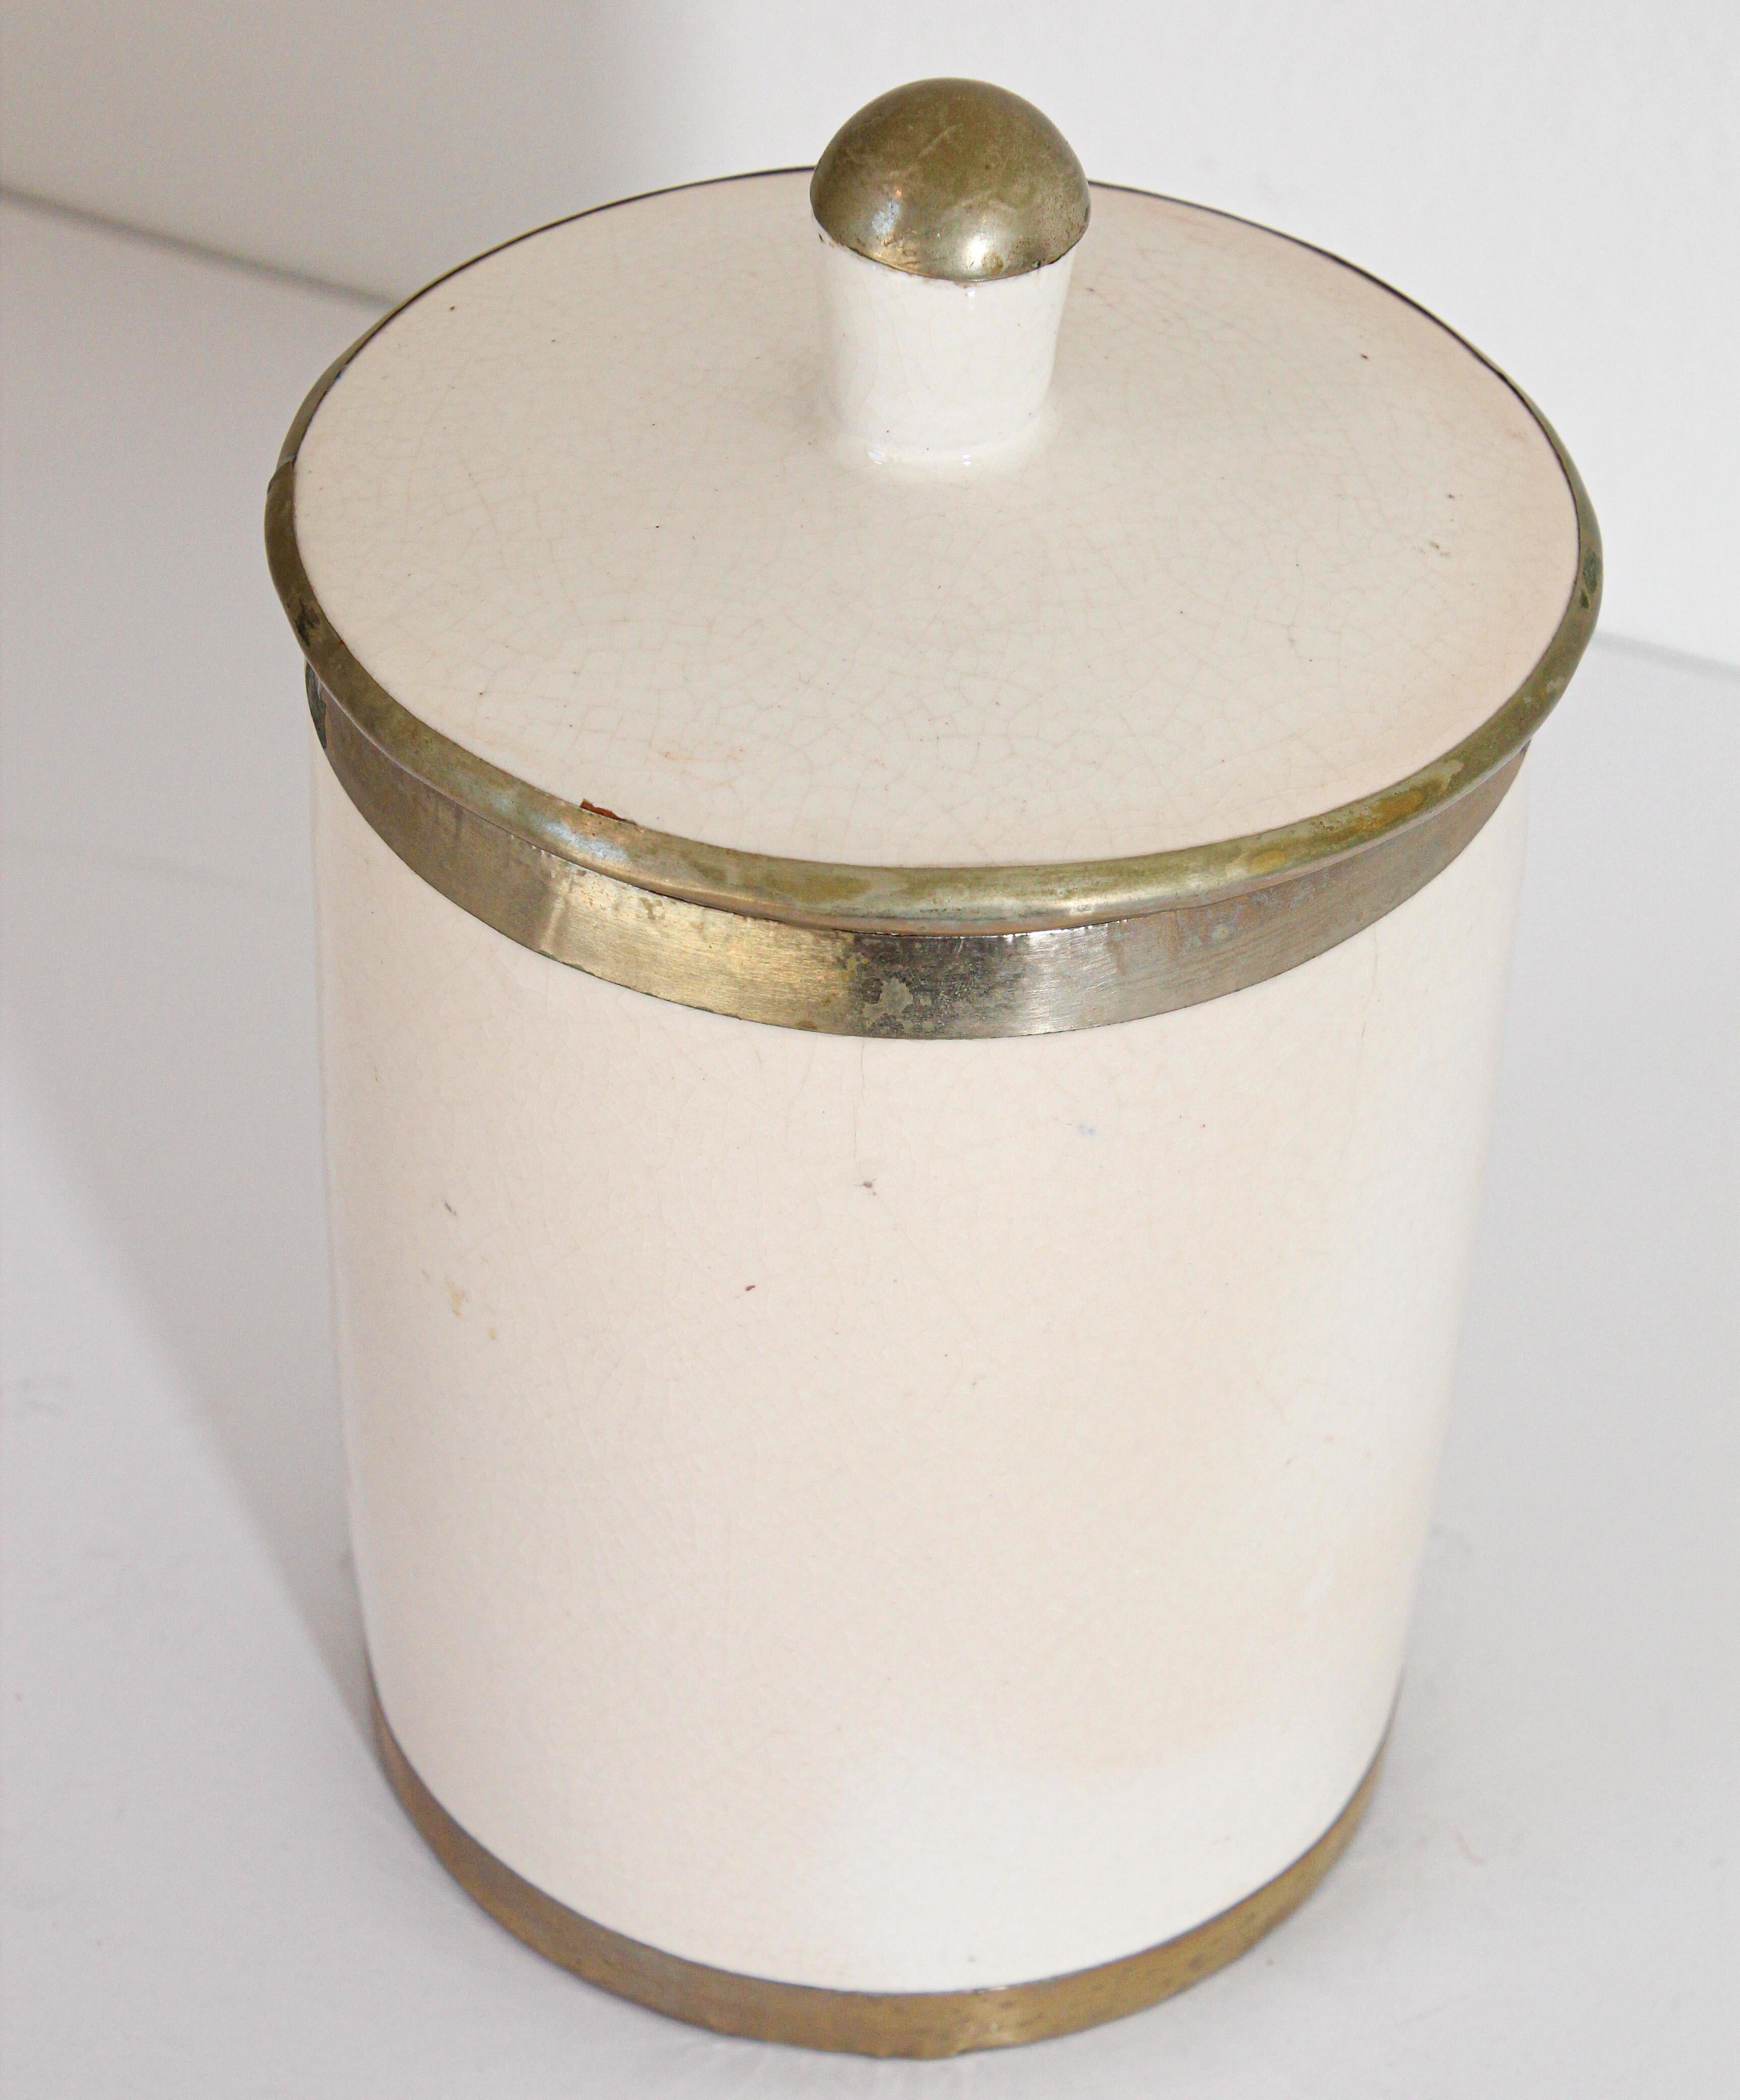 Vintage Moroccan Ceramic Urn with Lid, white crackled ceramic with silver overlaid.
Great to use in the kitchen or in the bathroom.
Great folk art vintage Moroccan decorative small ceramic urn with lid.
Handcrafted in Safi Morocco, Circa